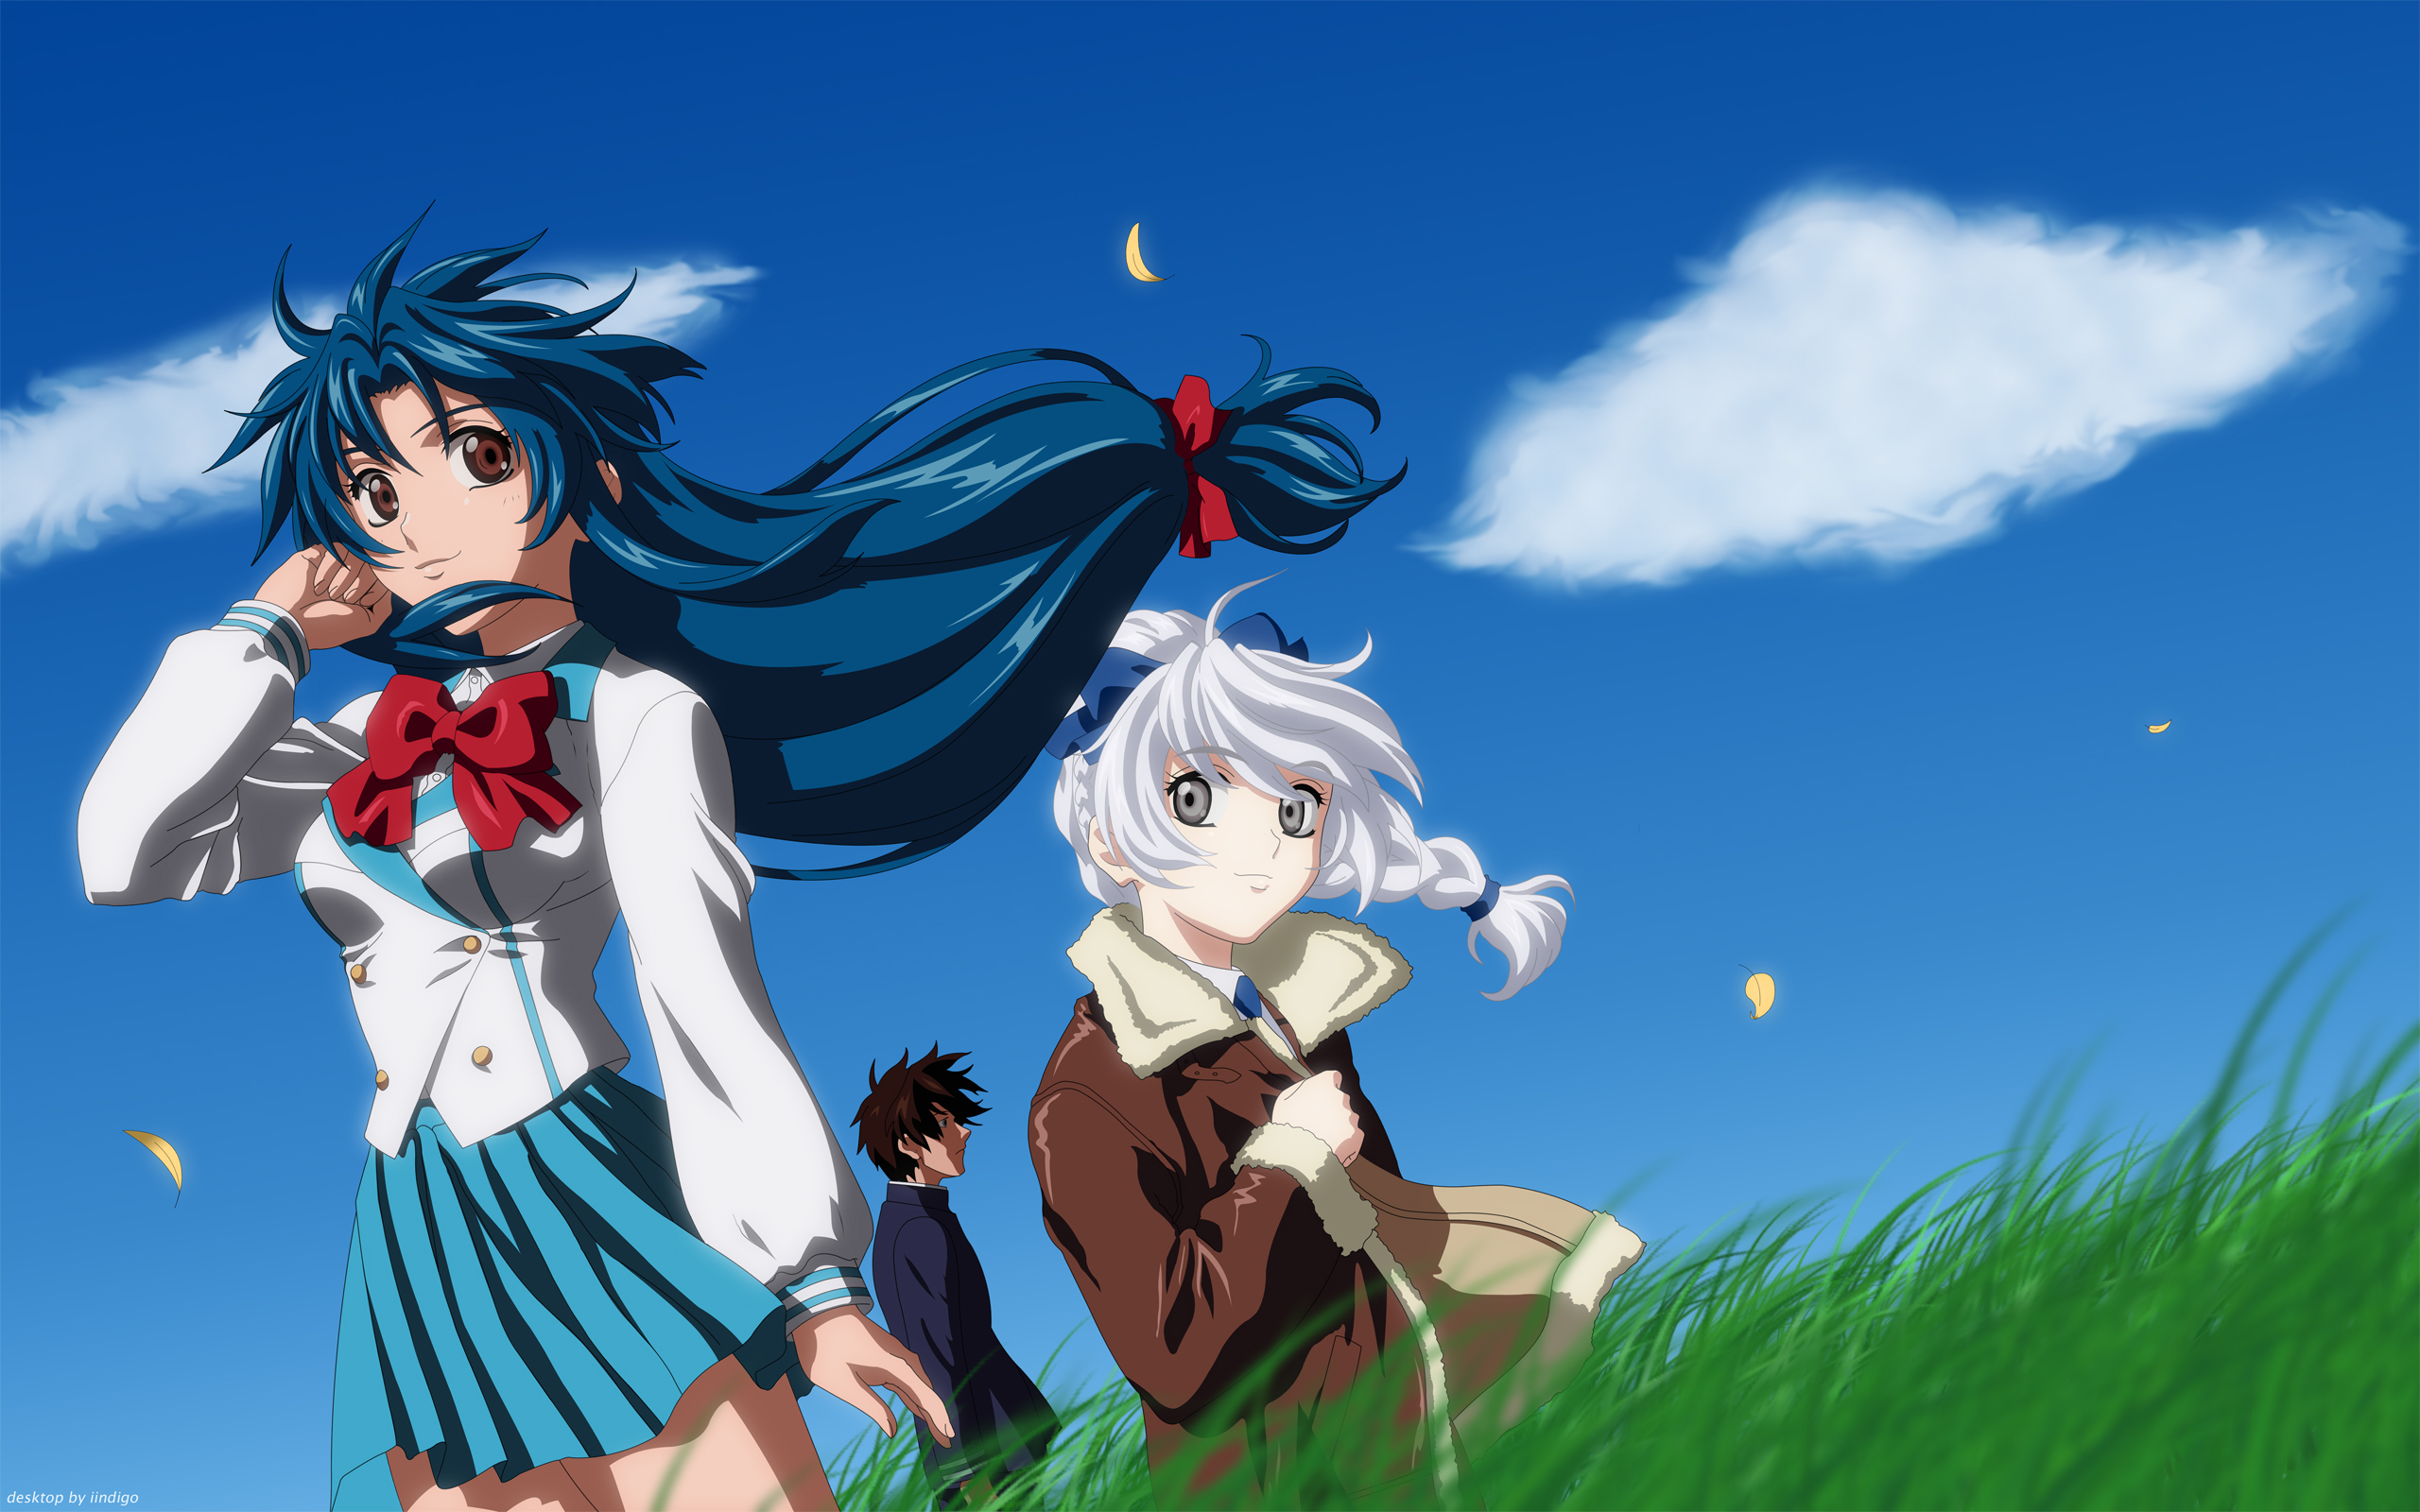 Anime characters Kaname, Sousuke, and Teletha from Full Metal Panic! in a striking desktop wallpaper.